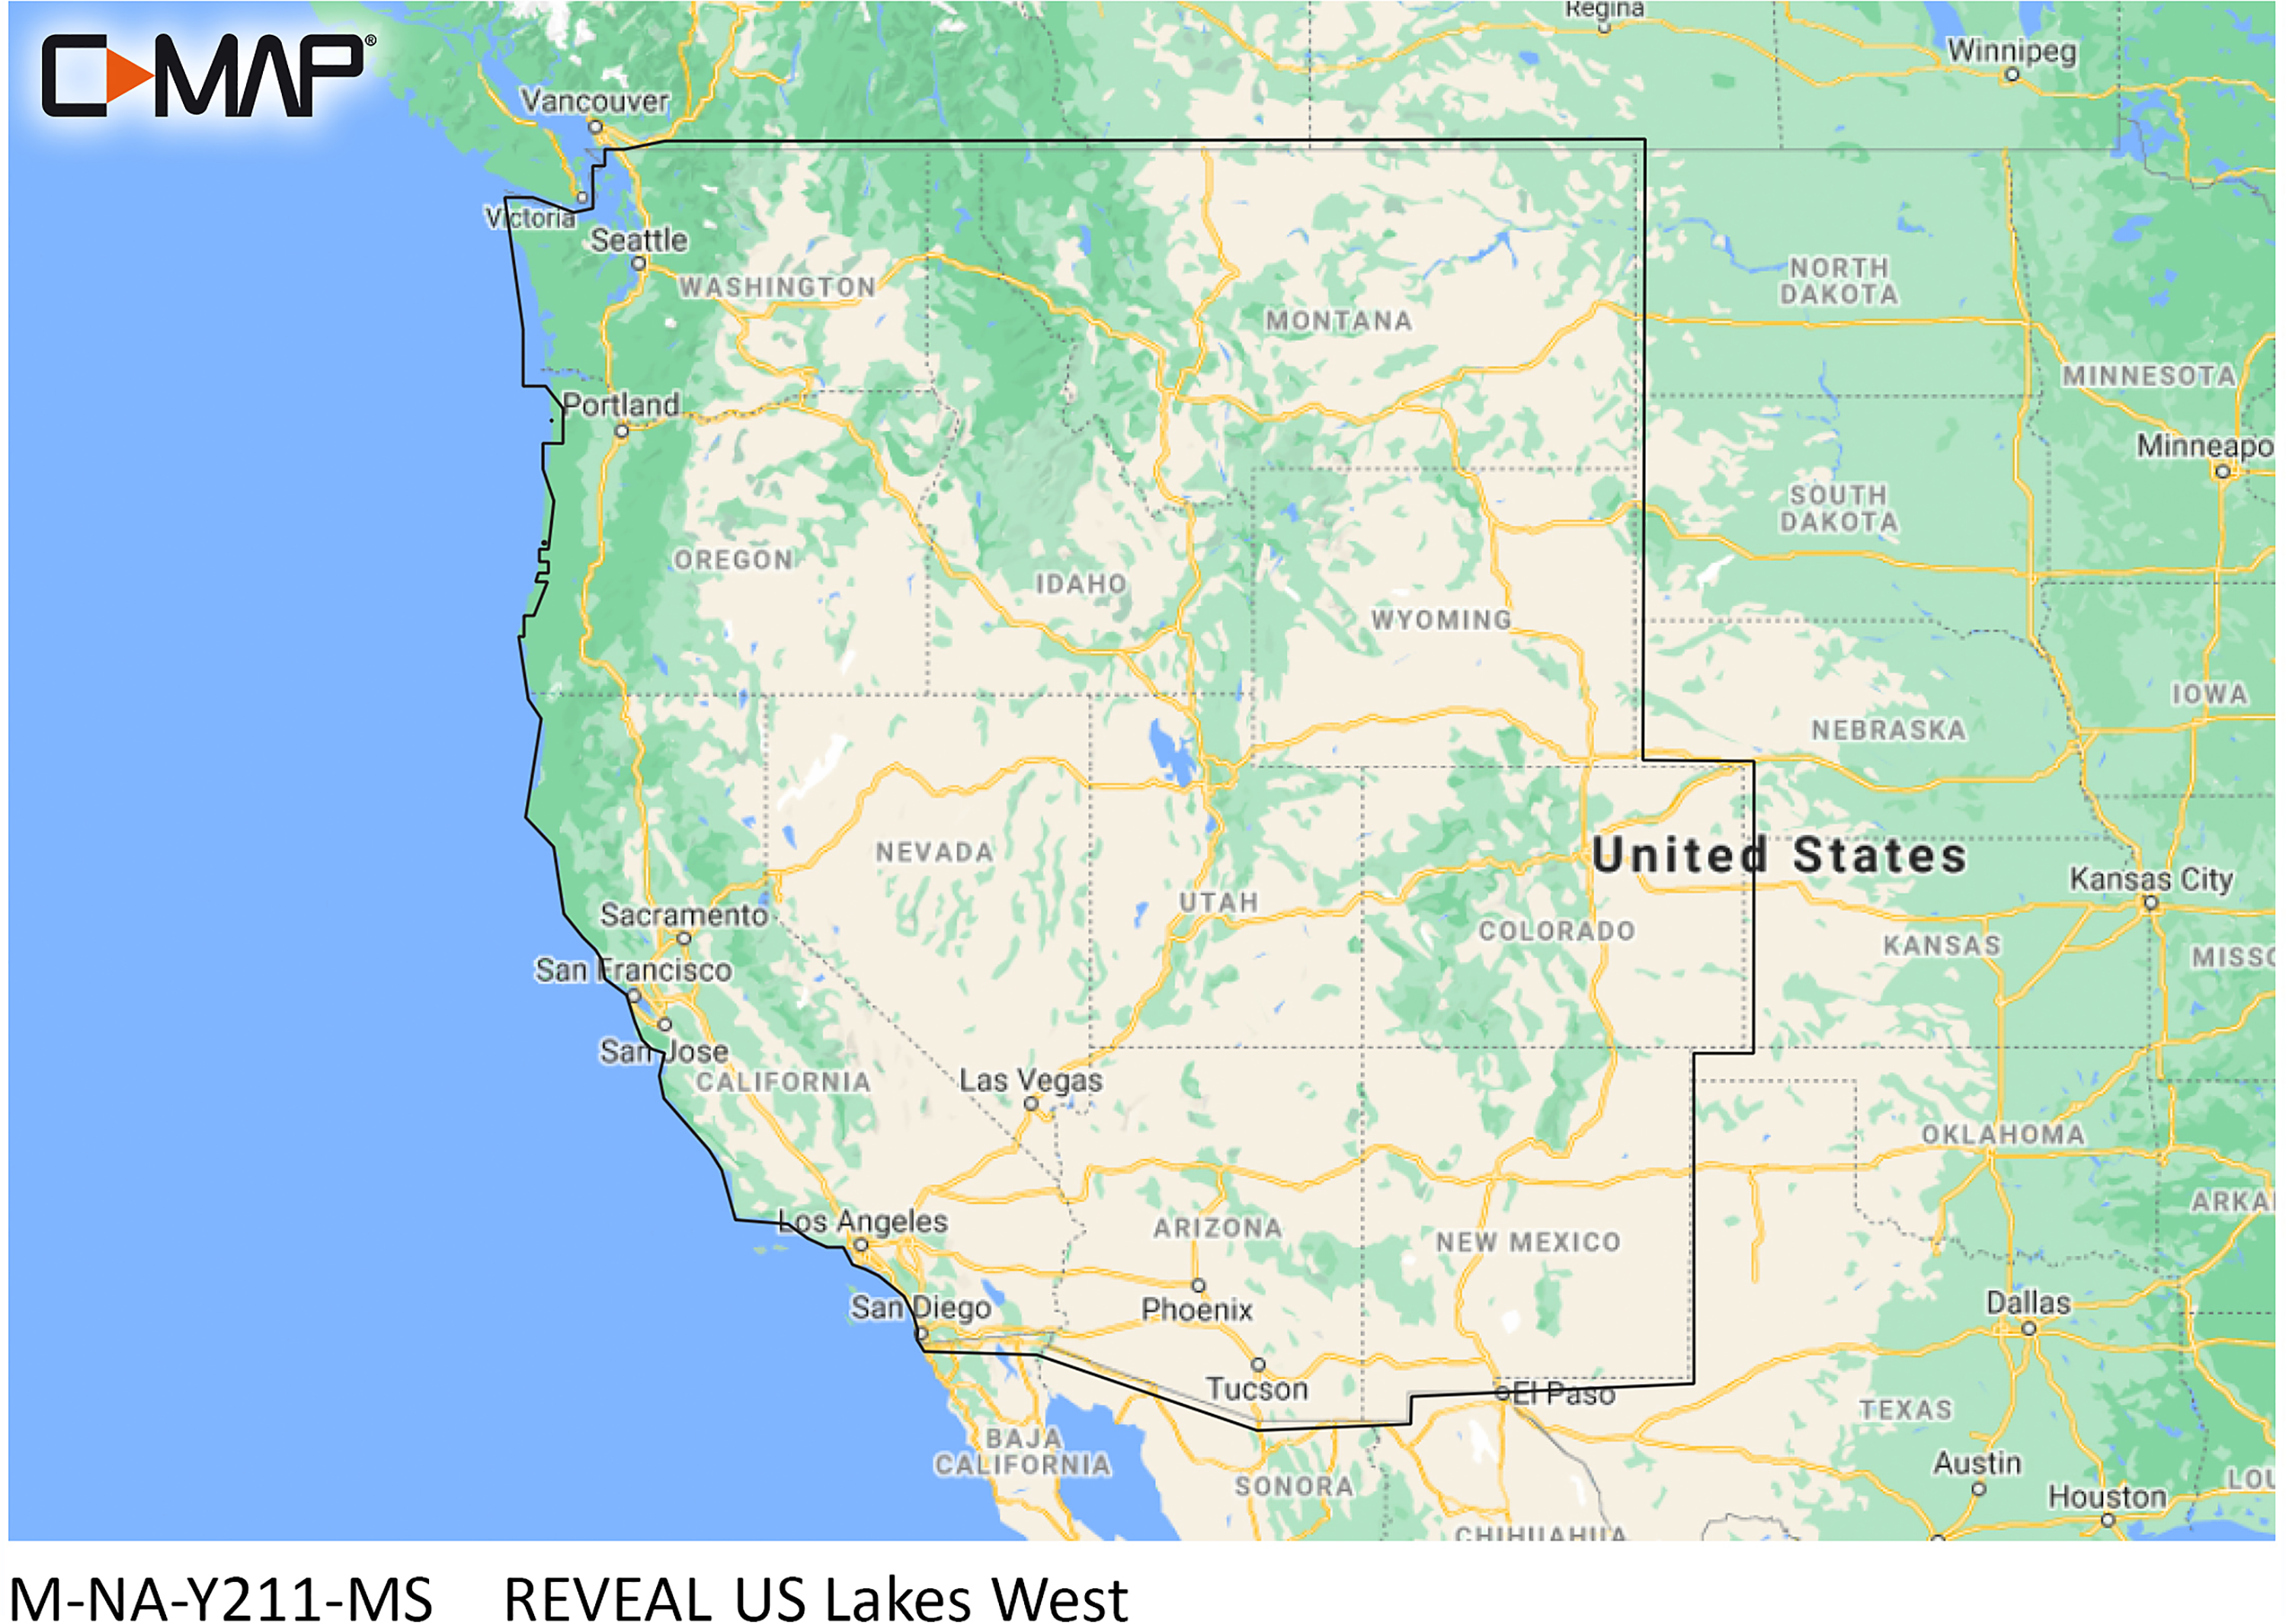 C-MAP Reveal SD Card Map Chart - US Lakes - West